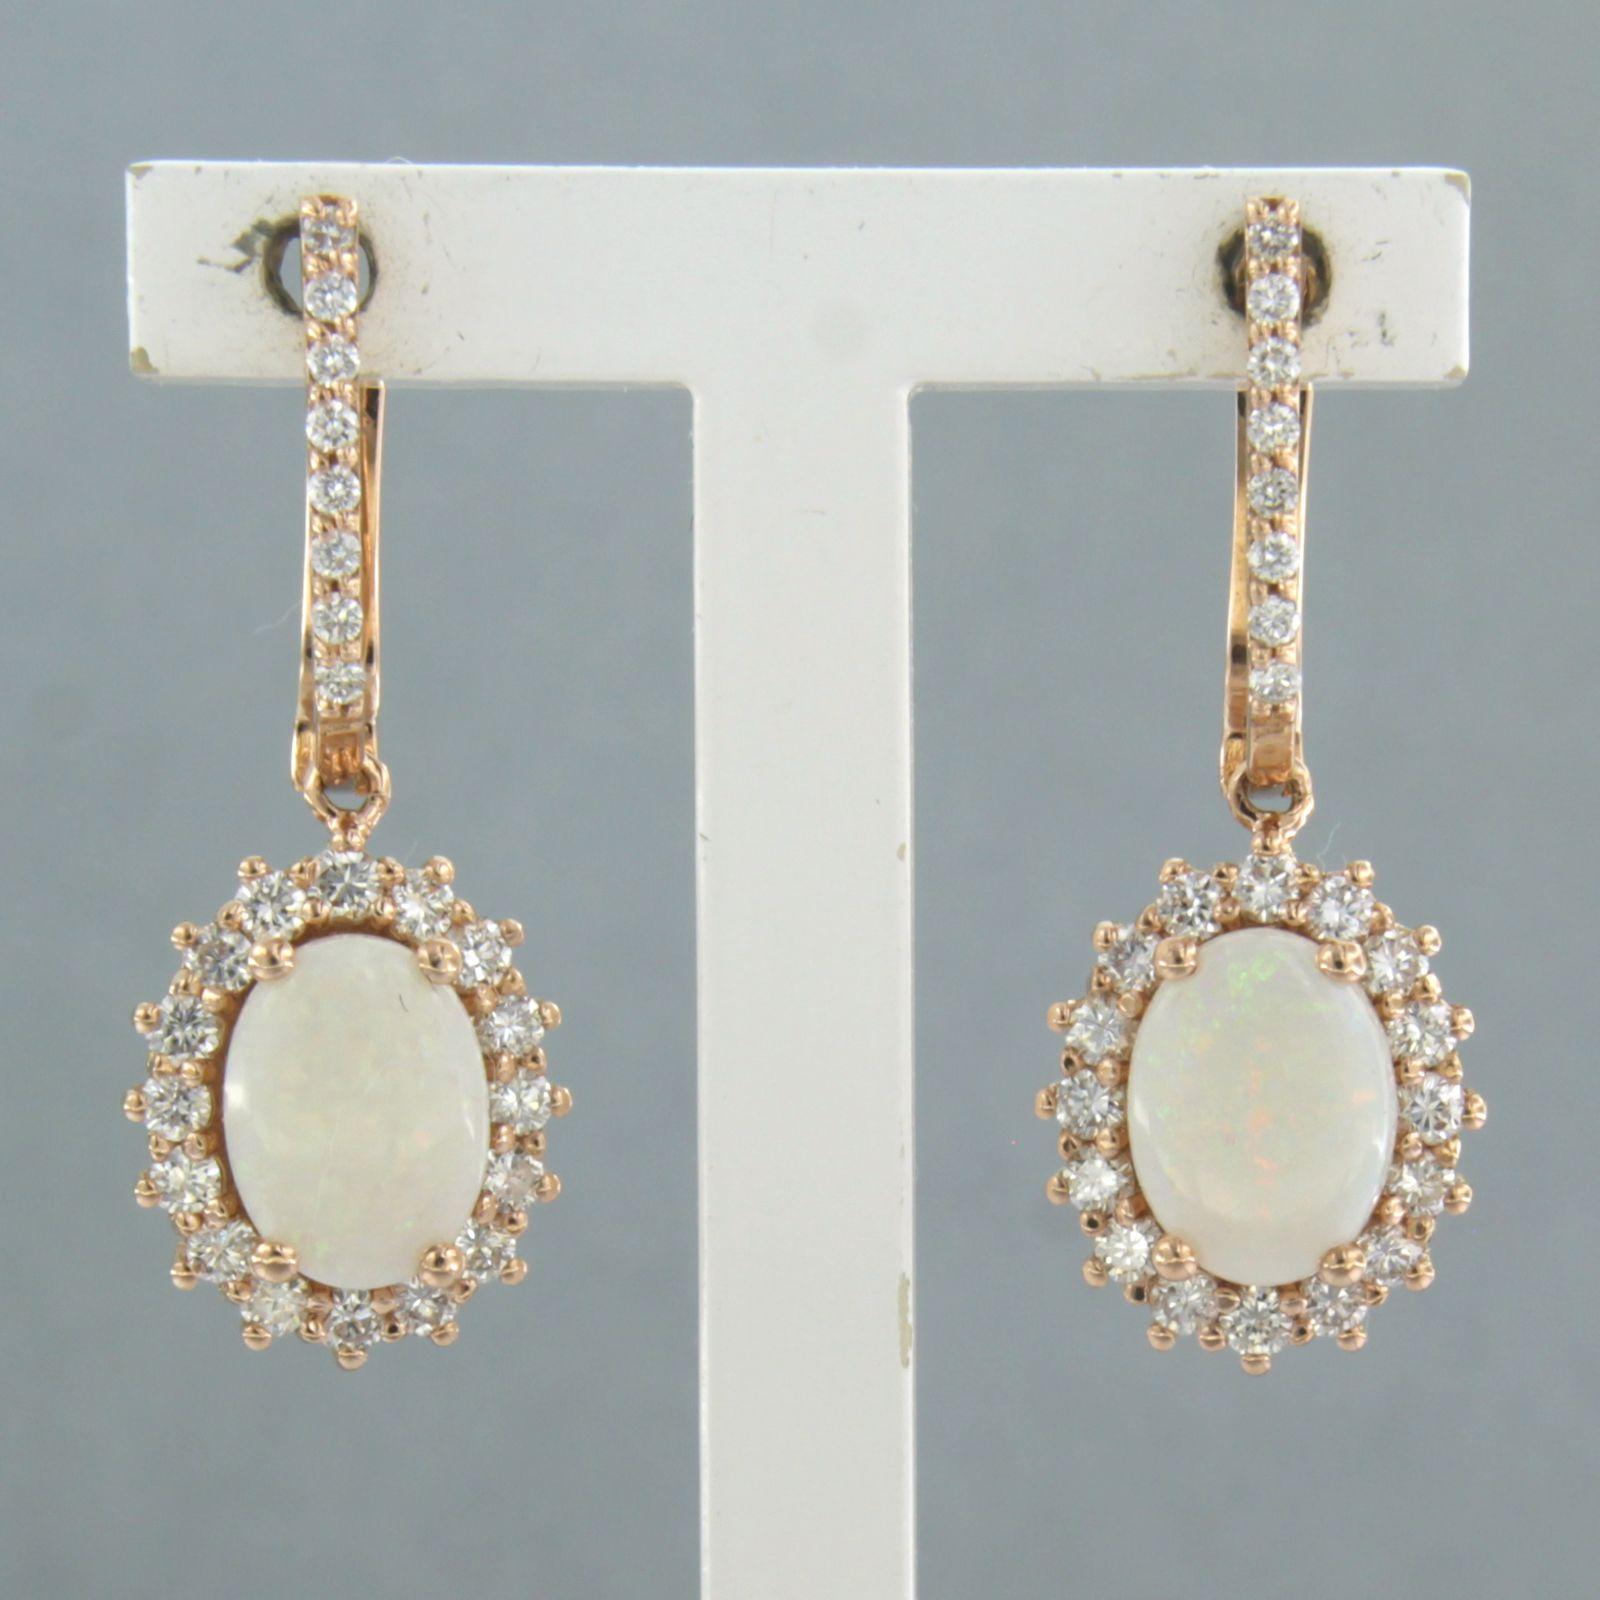 18k pink gold entourage earrings with opal and brilliant cut diamond up to 0.70ct - F/G – VS/SI

Detailed description:

the size of the earring is 2.6 cm long by 1.0 cm wide

Total weight 5.7 grams

set with

- 2 x 8.0 mm x 6.0 mm oval cabachon cut